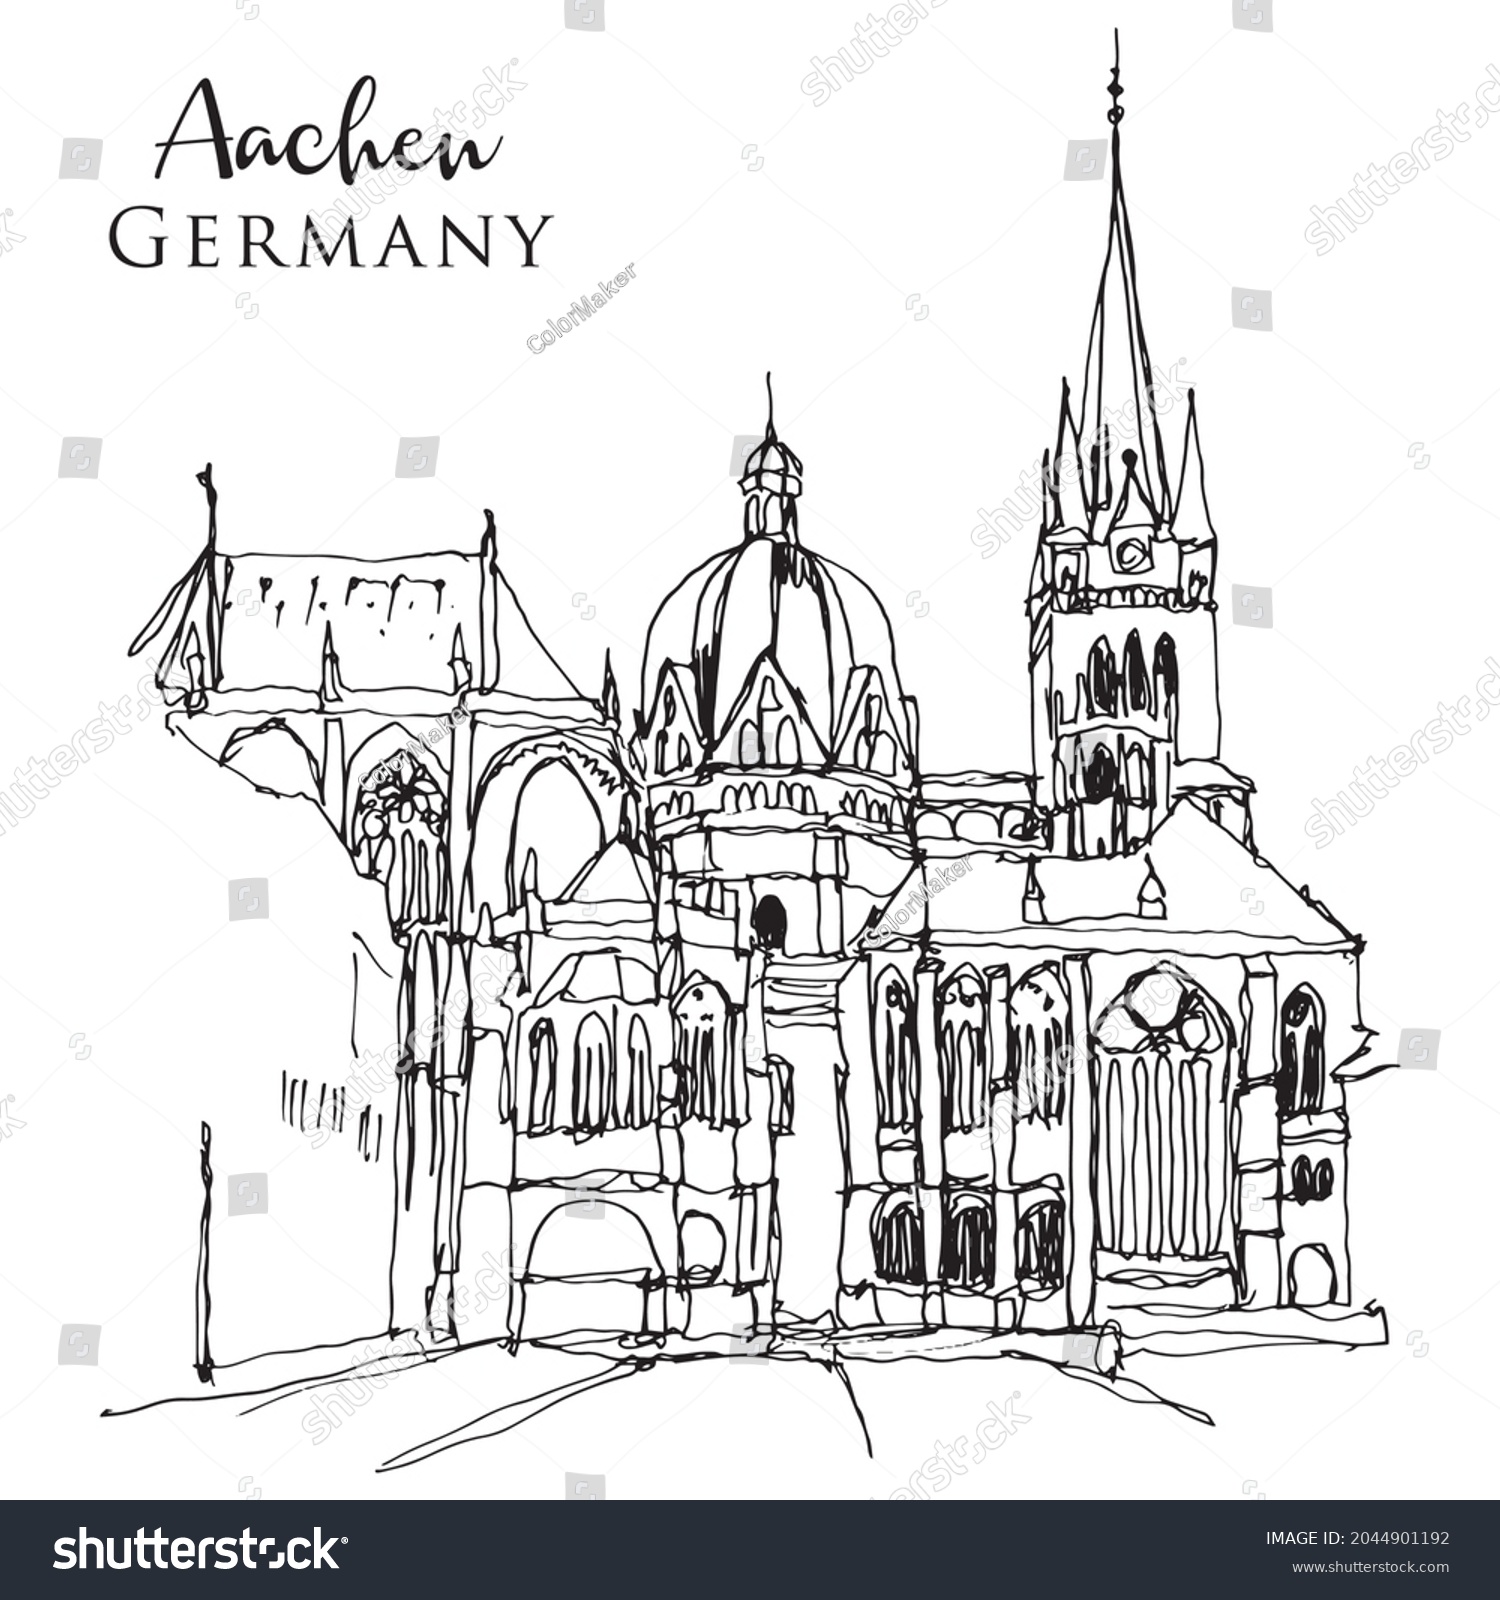 SVG of Vector hand drawn sketch illustration of the Imperial Cathedral in Aachen, Germany svg